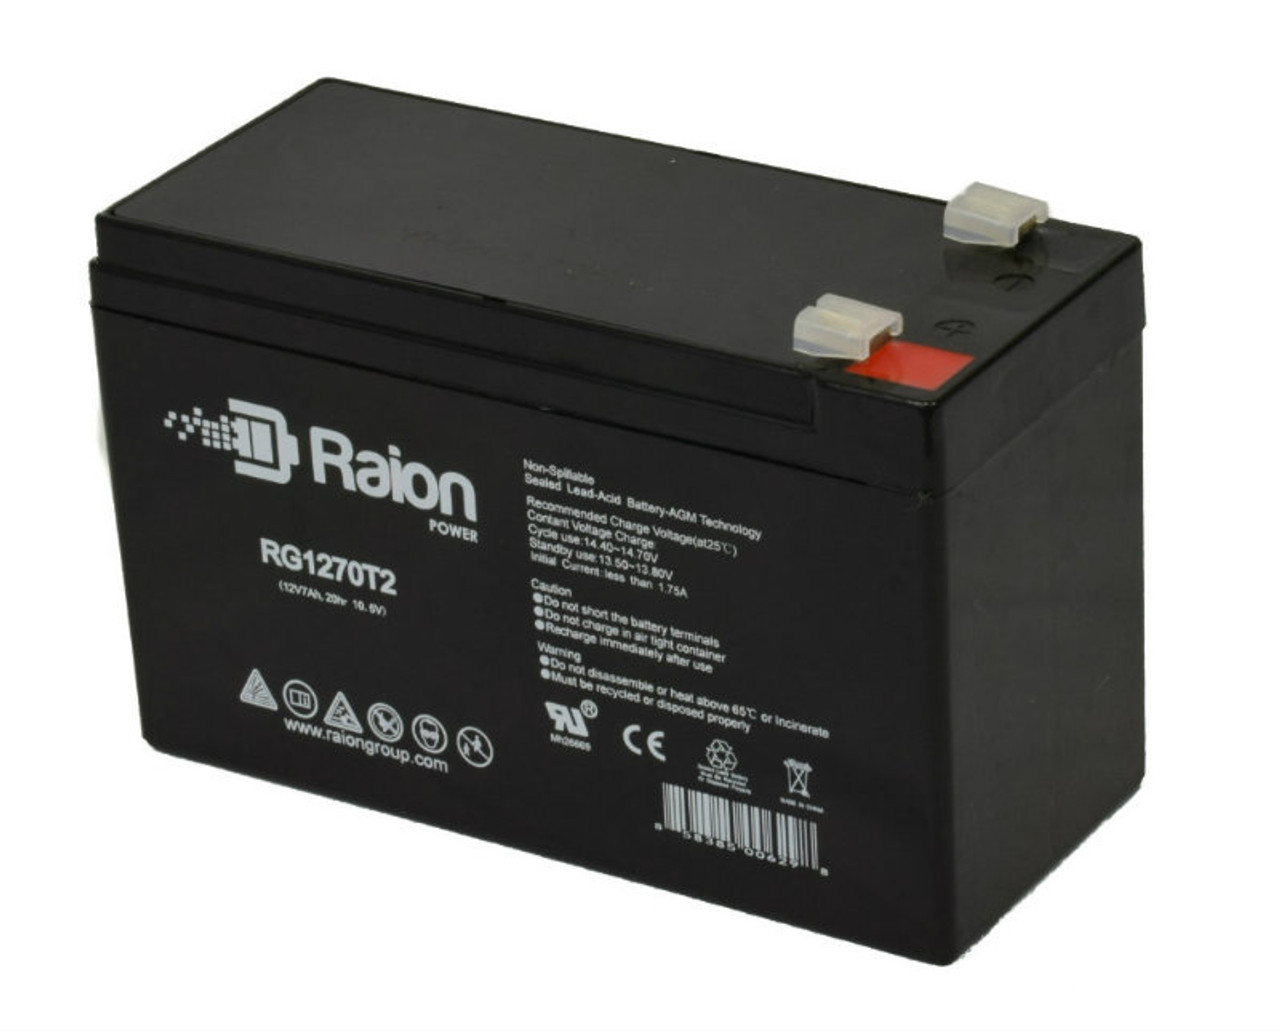 Raion Power RG1270T1 12V 7Ah Non-Spillable Replacement Battery for Long Way LW-6FM6.8